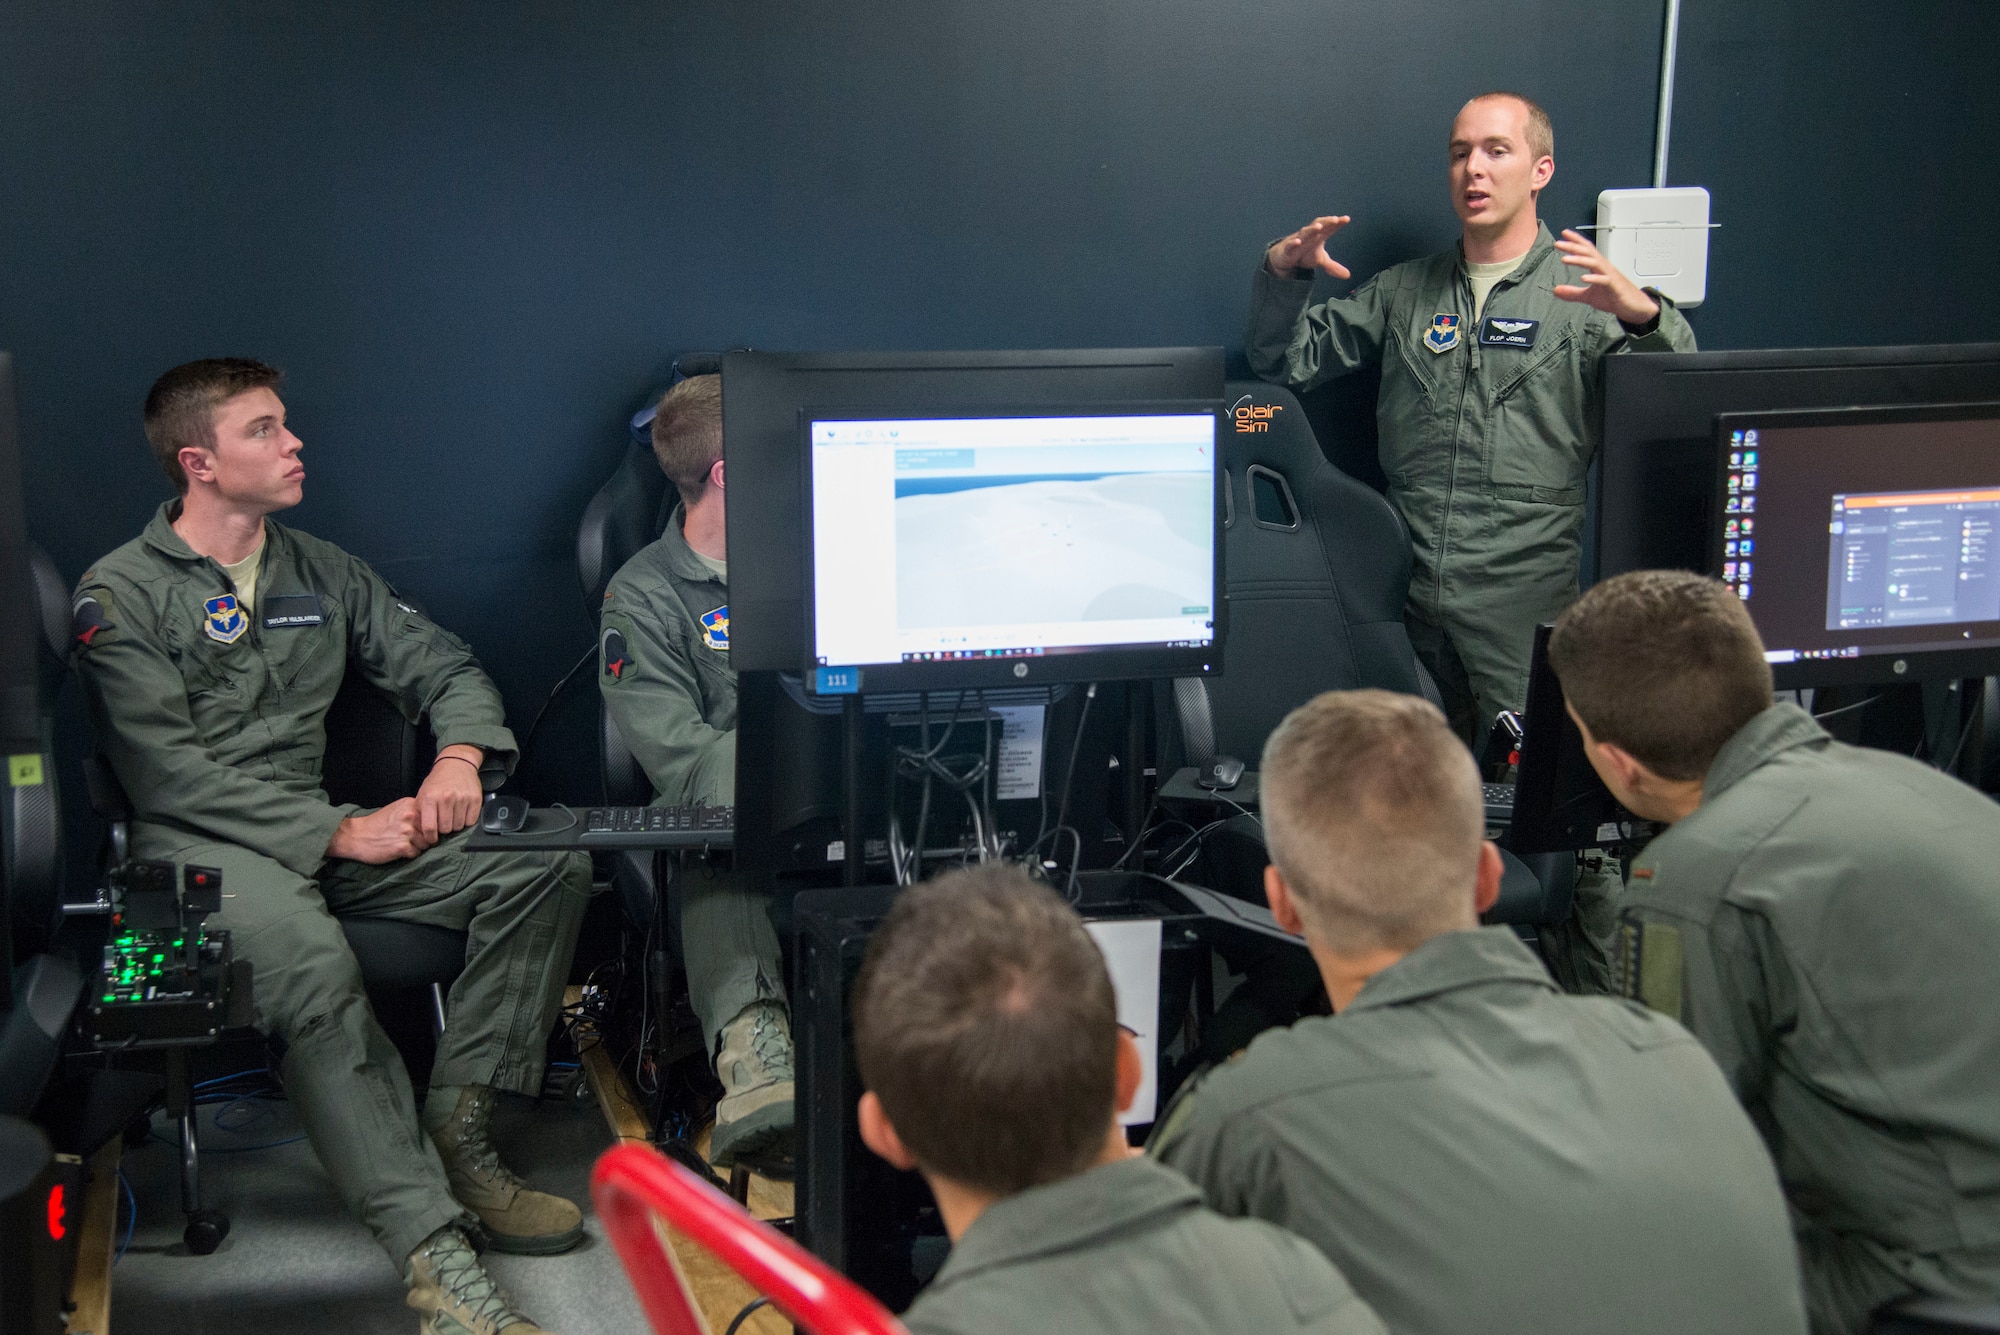 U.S. Air Force Capt. Johnathan Joern (standing), Pilot Training Next instructor pilot, trains PTN students on flying procedures at the Armed Forces Reserve Center in Austin, Texas, June 22, 2018. Air Education and Training Command officials announced the second iteration of Pilot Training Next would begin in January 2019 during a panel at the 2018 Air Force Association Air, Space and Cyber Conference in National Harbor, Maryland. (U.S. Air Force photo by Sean M. Worrell)